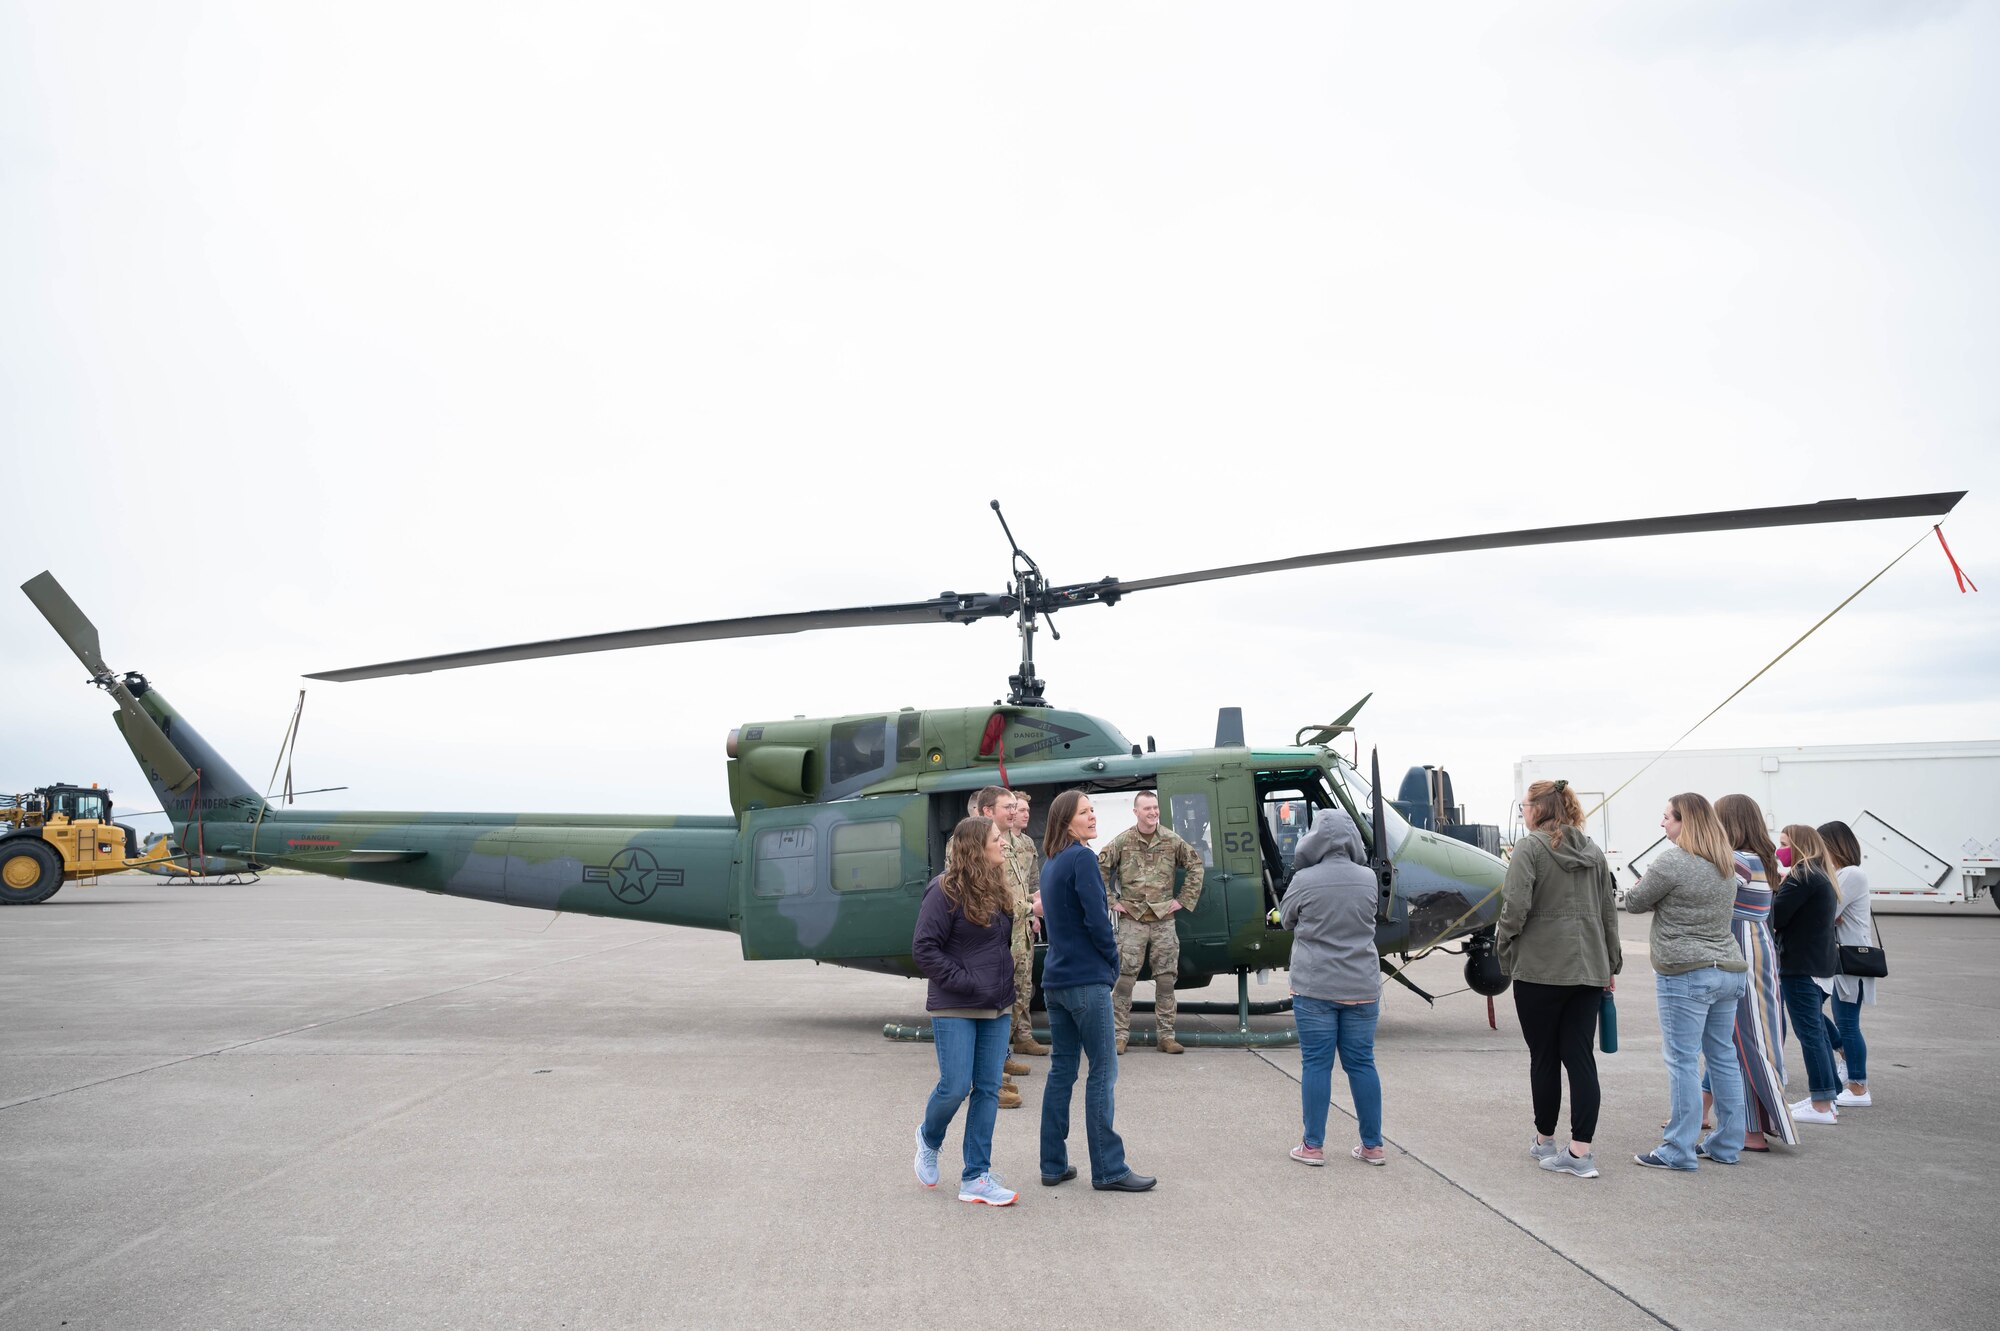 Members of the 40th Helicopter Squadron explain their mission to military spouses and show off a UH-1N "Huey" helicopter during a tour May 7, 2021, at Malmstrom Air Force Base, Mont.